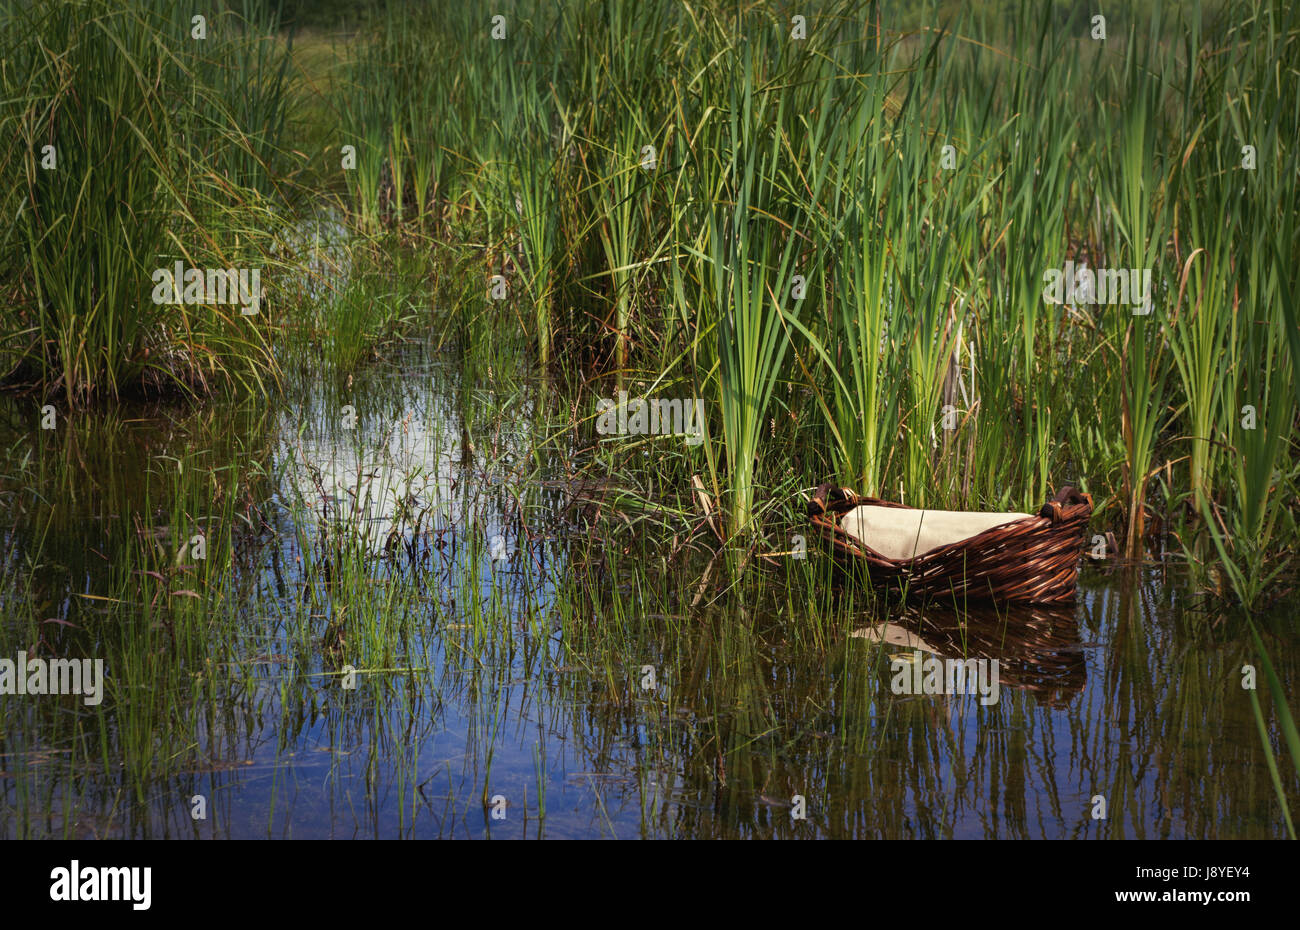 Baby Moses in a basket floating in the river among the rushes and reeds Stock Photo